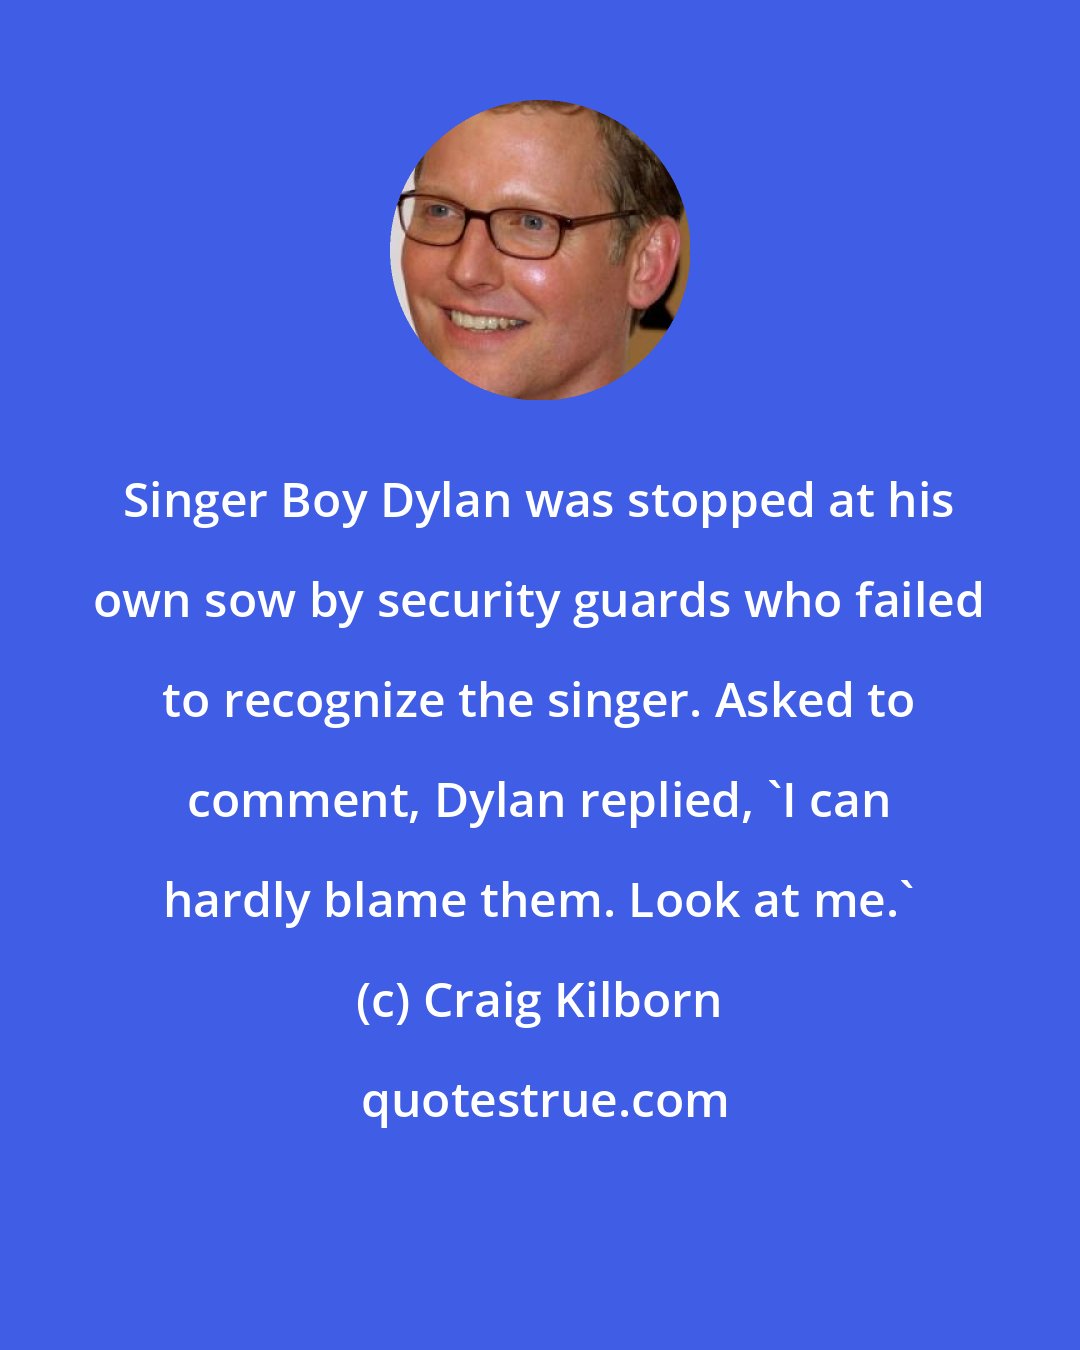 Craig Kilborn: Singer Boy Dylan was stopped at his own sow by security guards who failed to recognize the singer. Asked to comment, Dylan replied, 'I can hardly blame them. Look at me.'